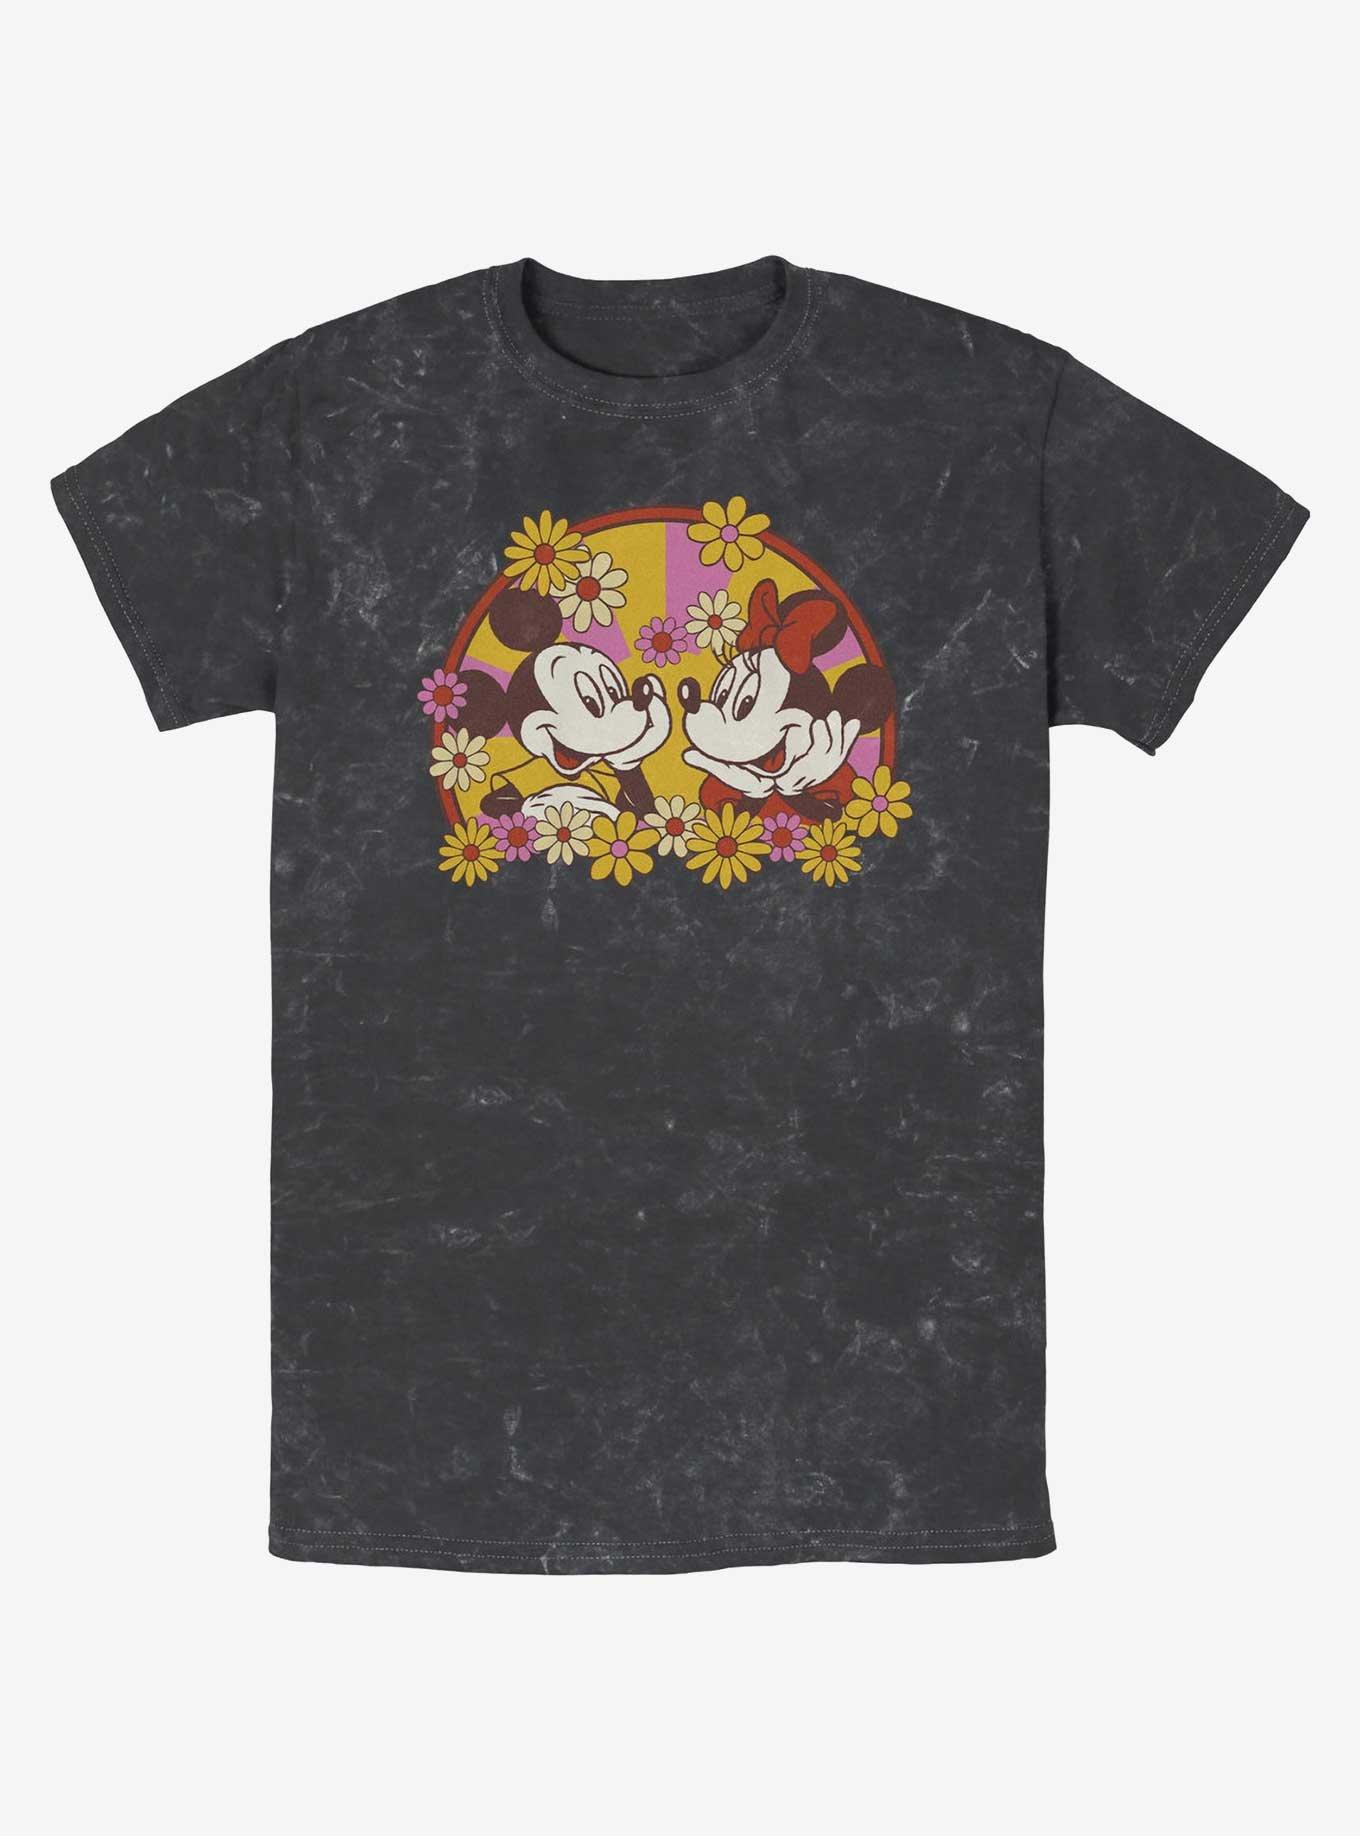 Disney Mickey Mouse & Minnie Mouse Love Bloom Mineral Wash T-Shirt, BLACK, hi-res